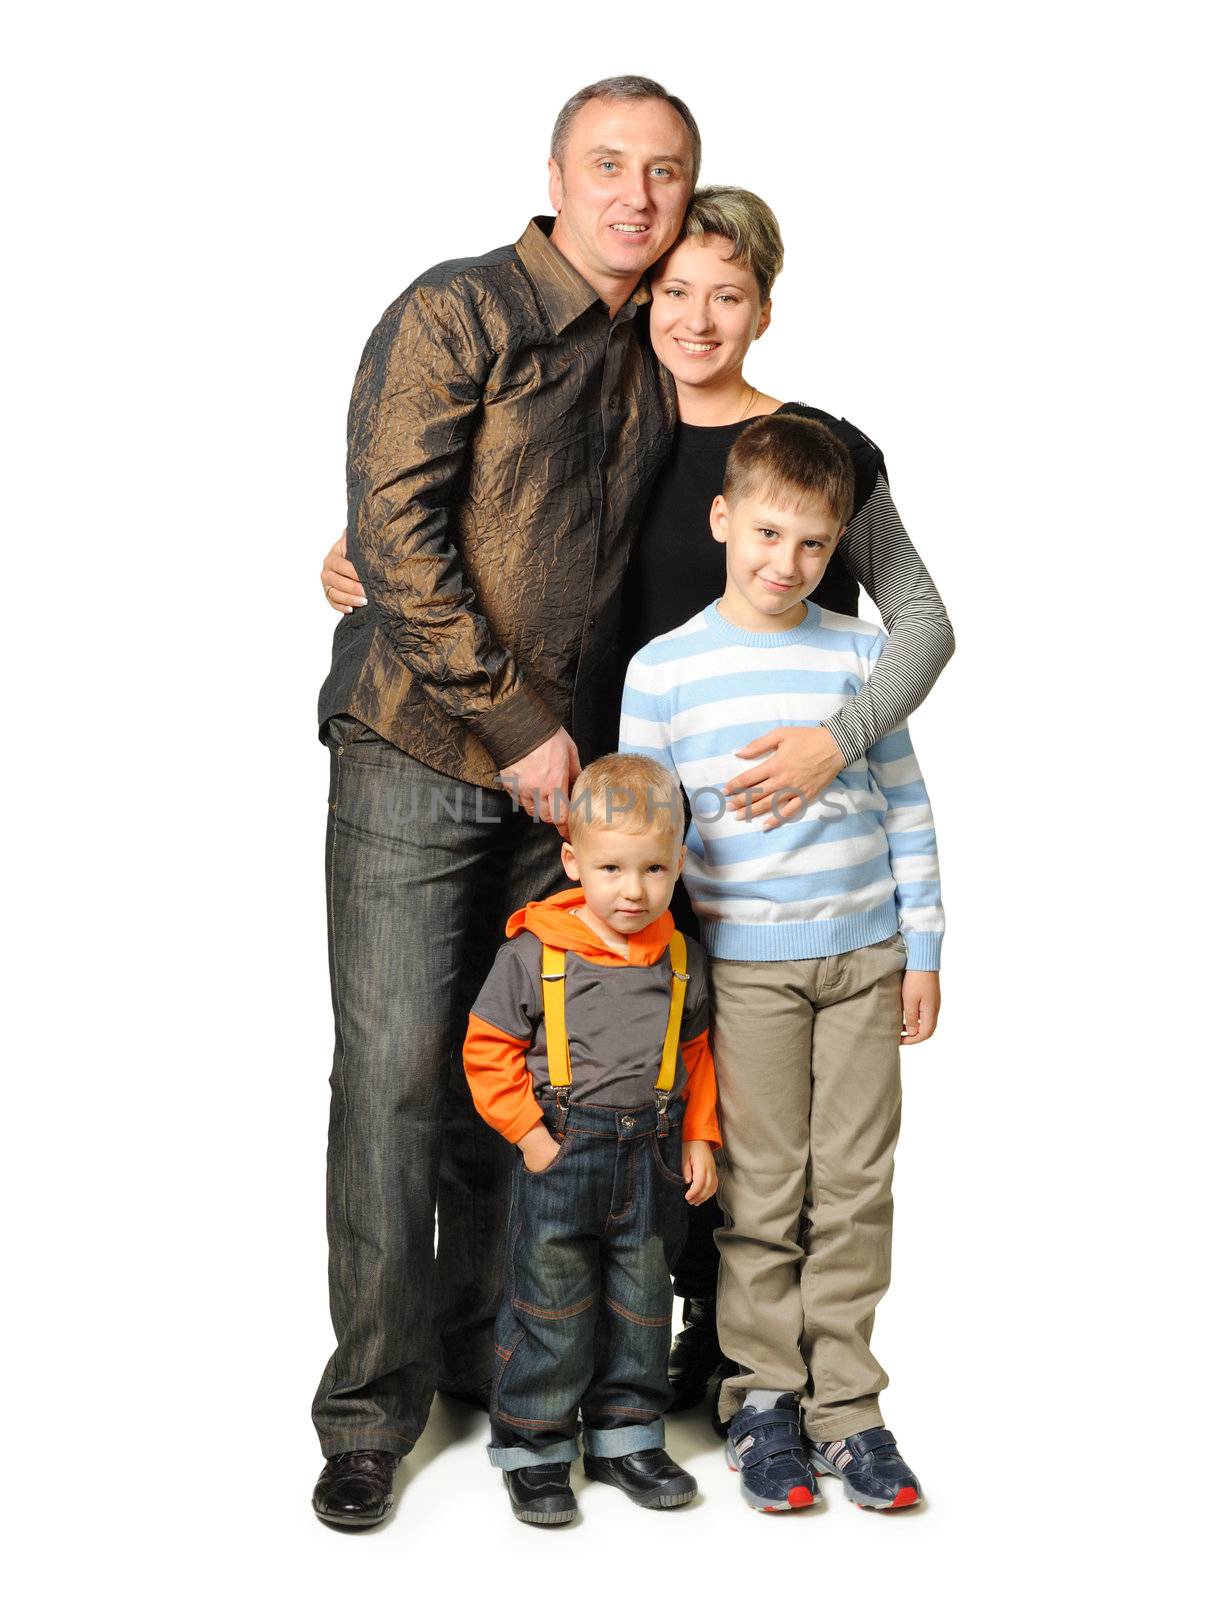 Happy family. The daddy, mum, two sons. It is isolated on a white background.